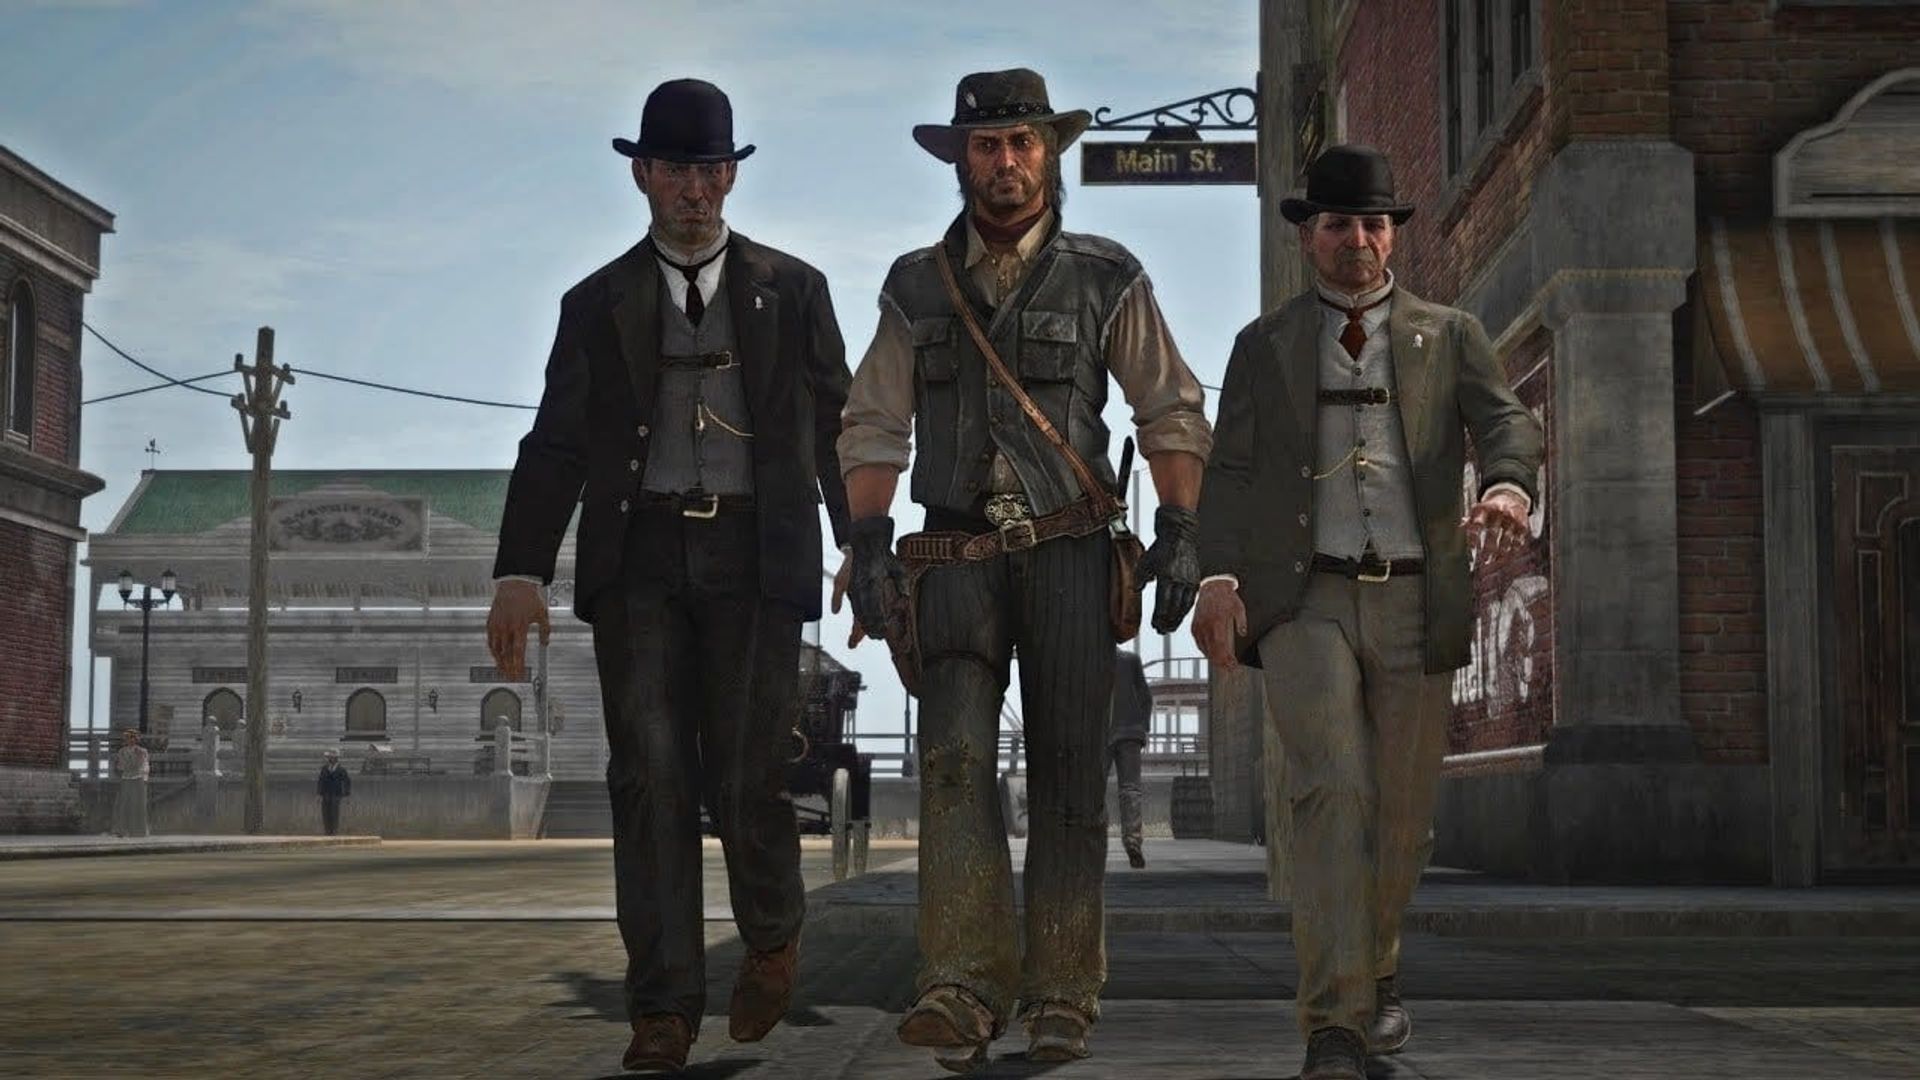 Red Dead Redemption: The Man from Blackwater background